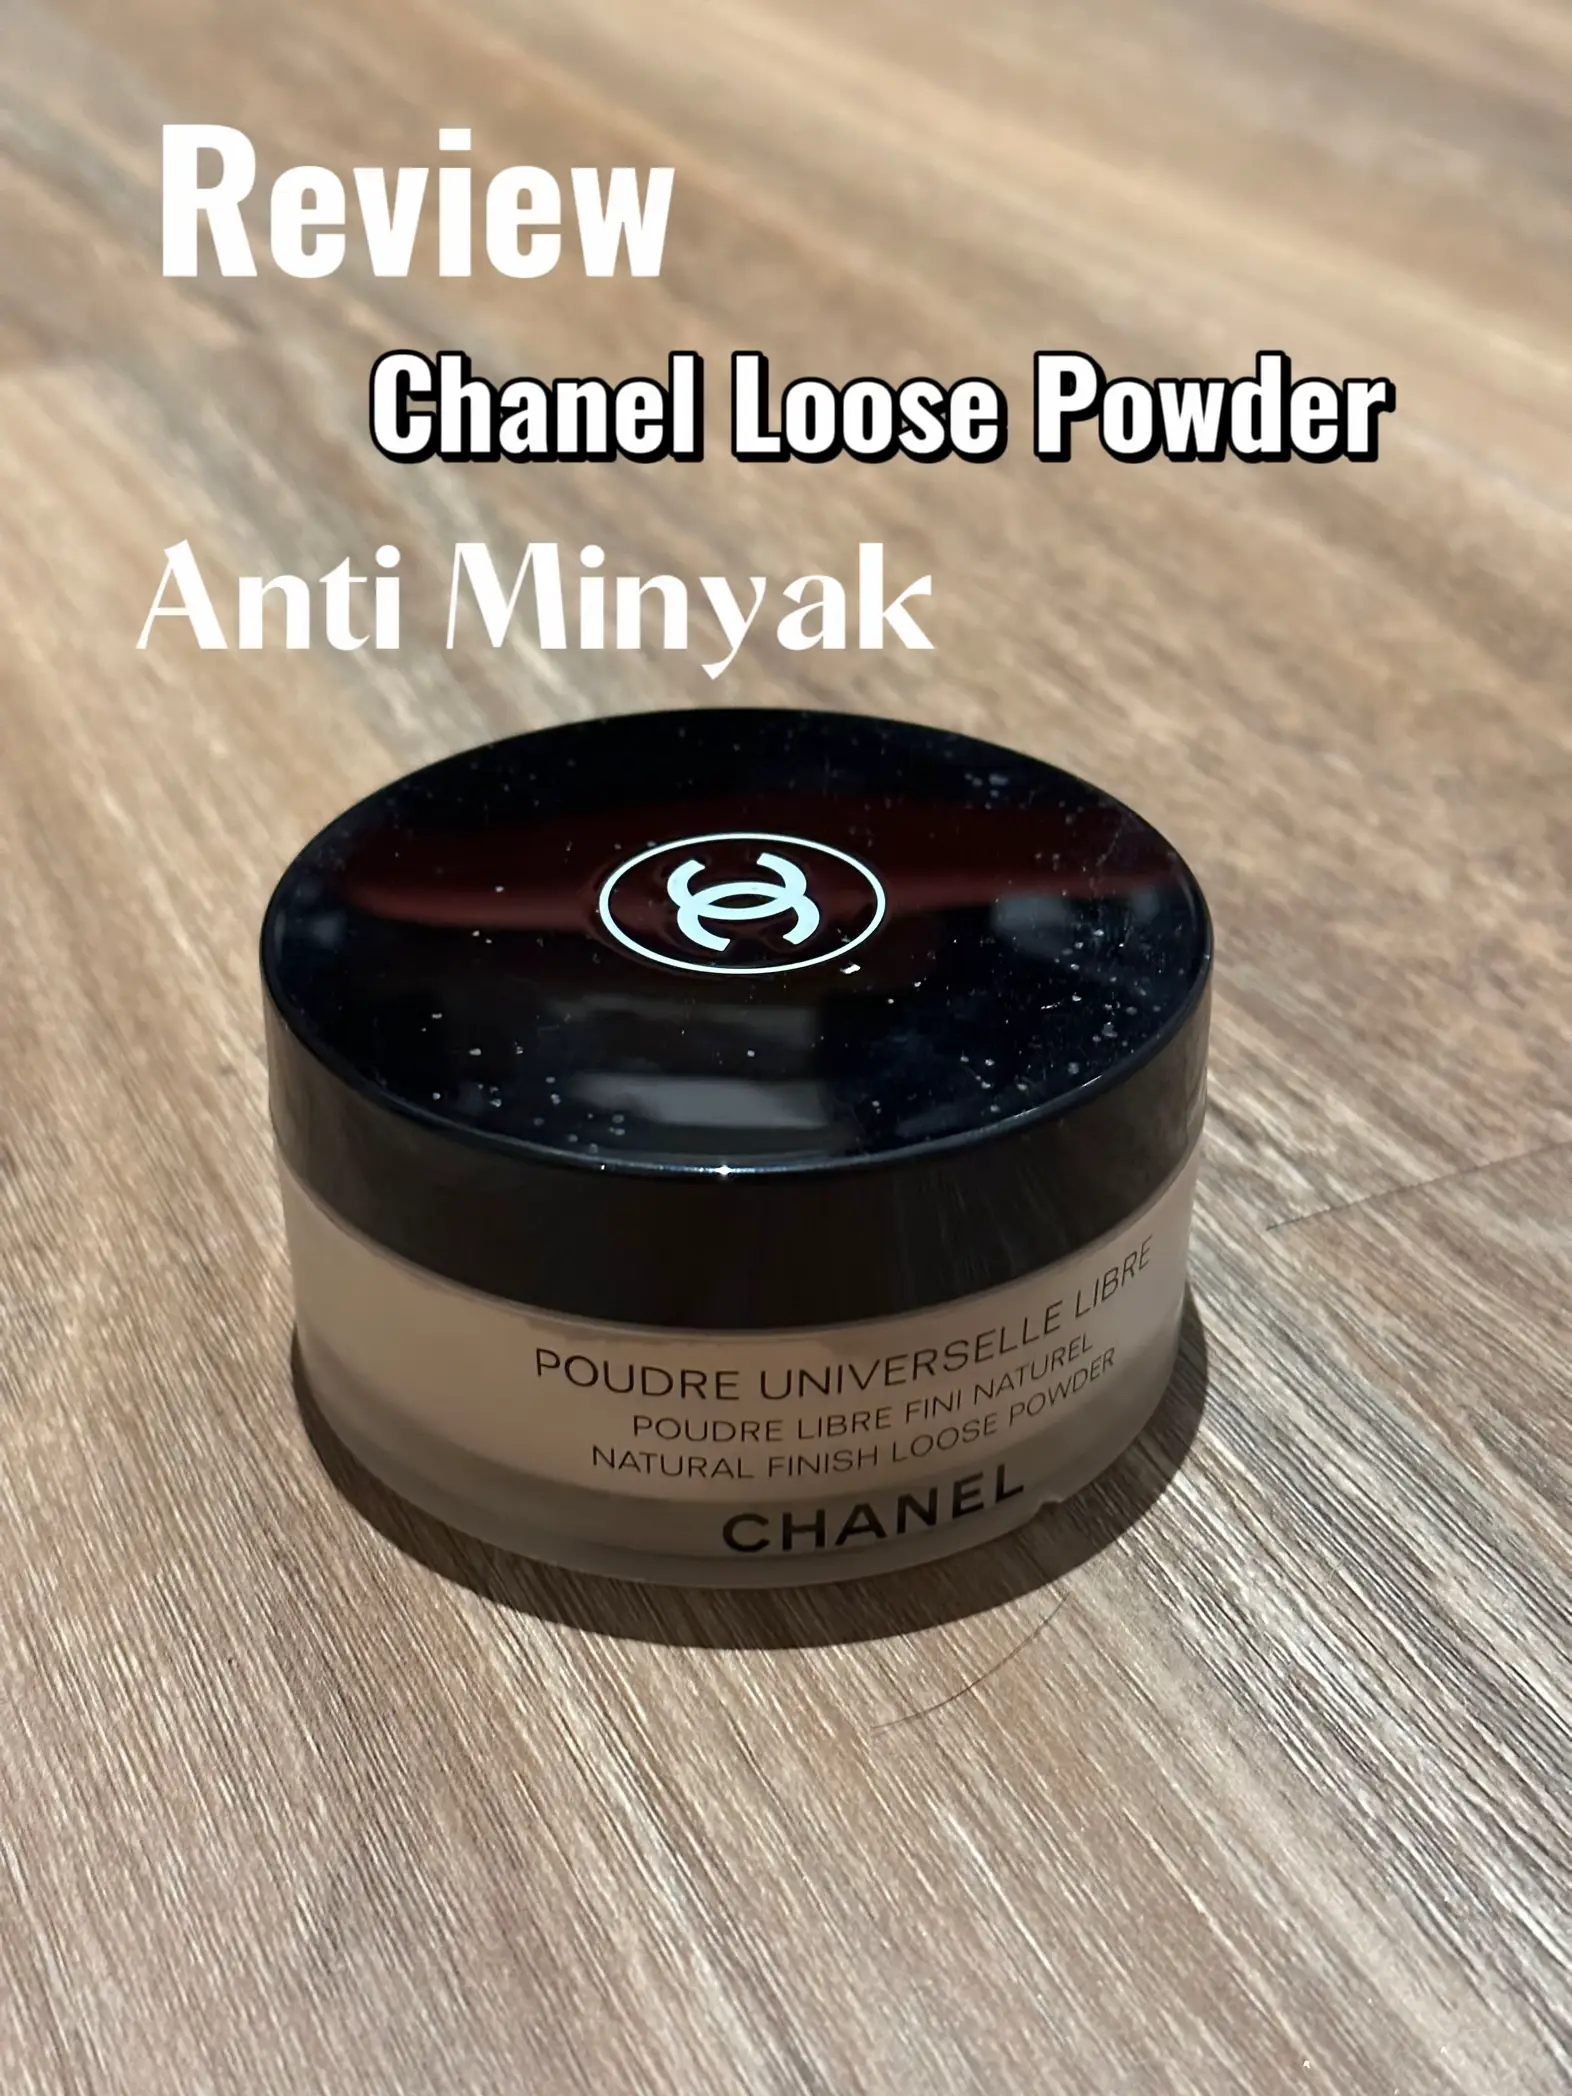 CHANEL+Poudre+Universelle+Libre+Face+Loose+Powder+%23+20+Clair for